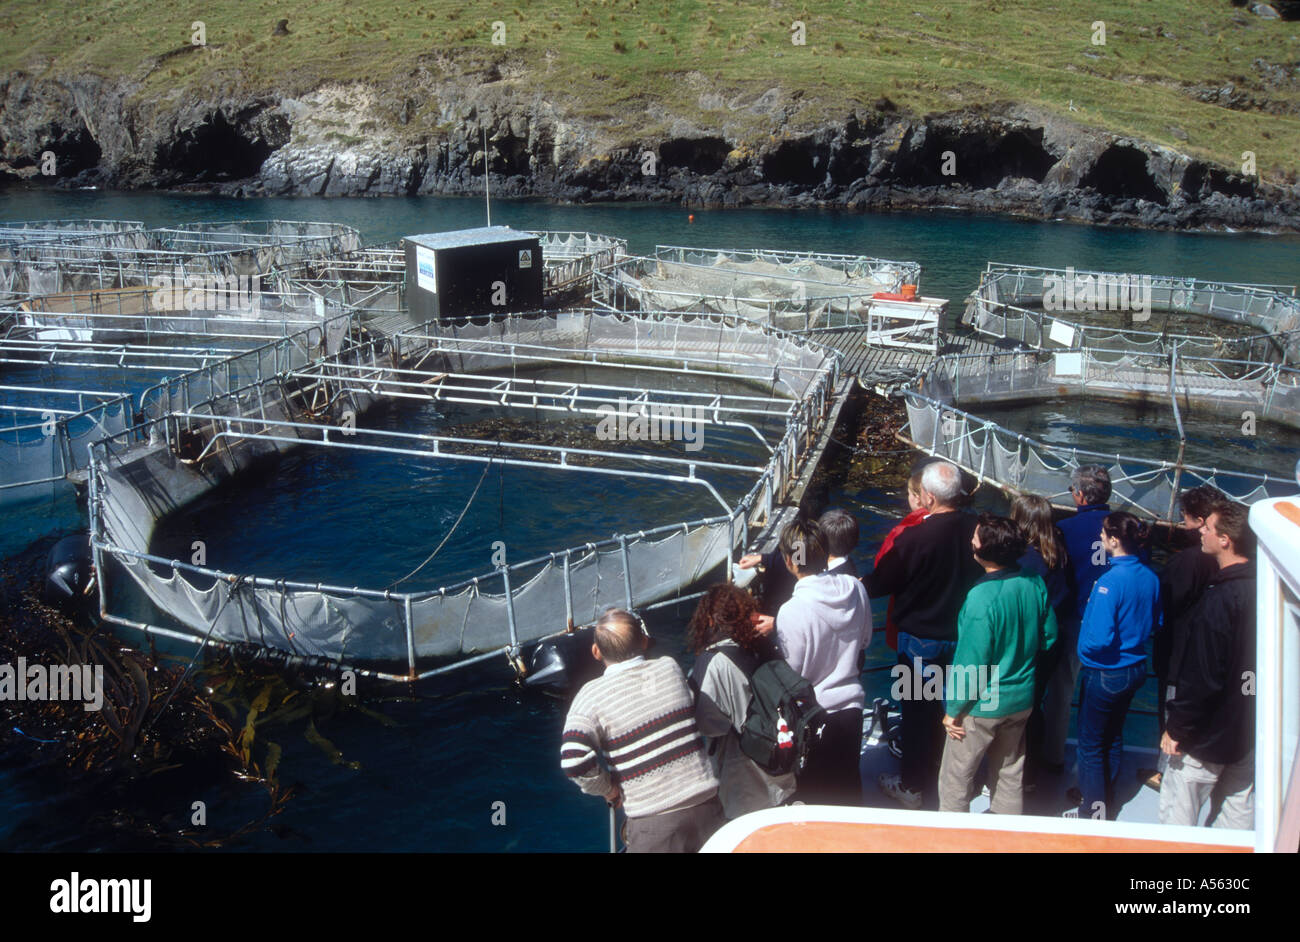 Tourists on a trip boat visit a salmon farm at Akaroa Harbour Christchurch South Island New Zealand Stock Photo